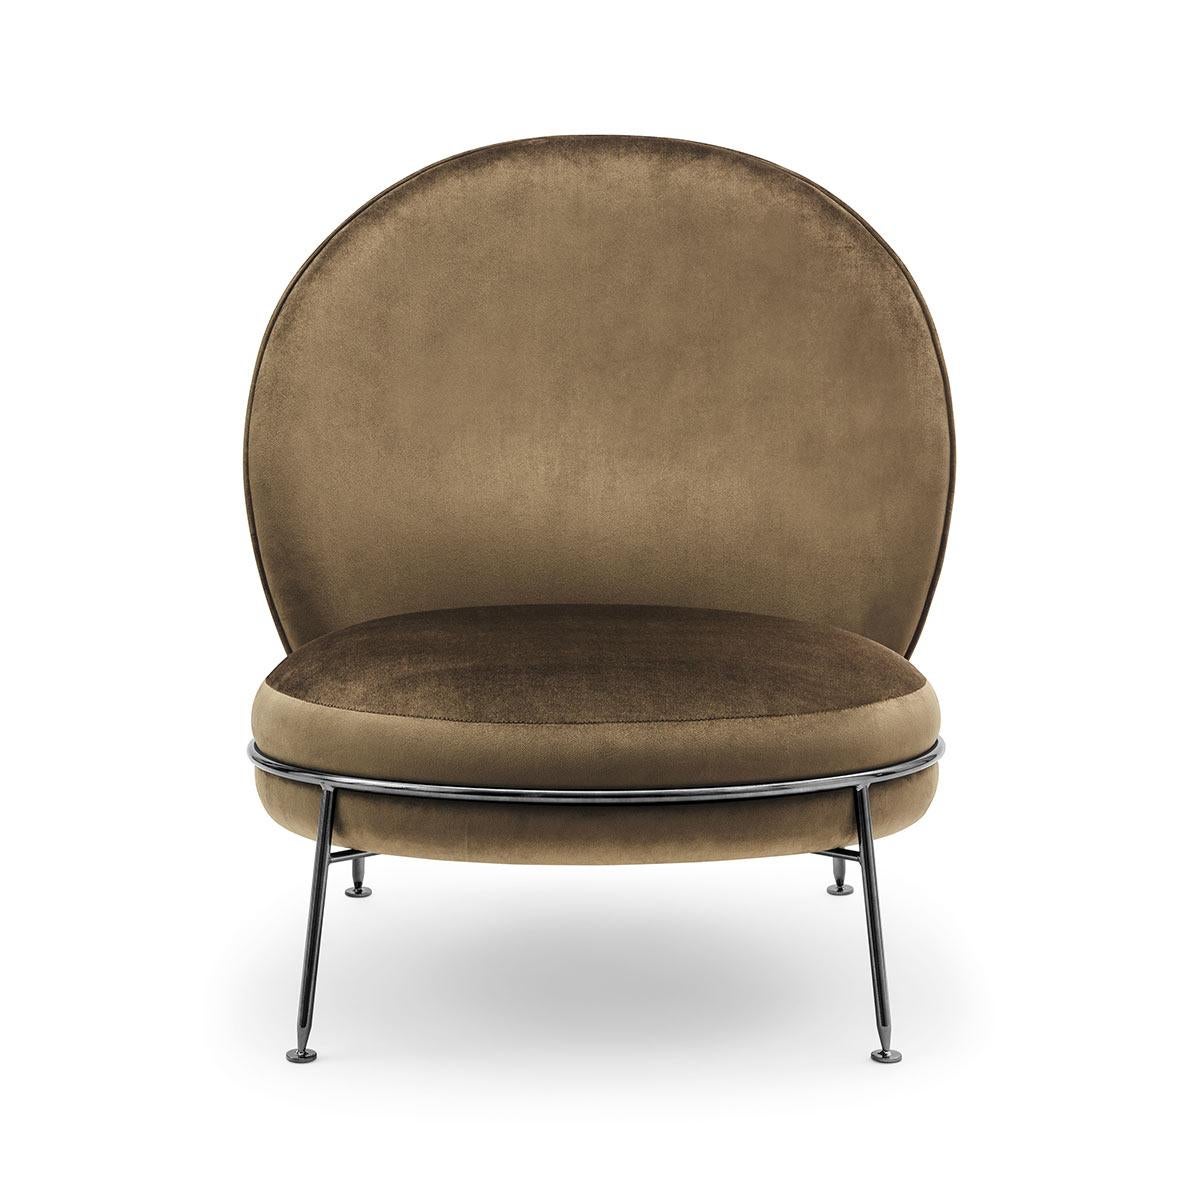 Contemporary Beautiful Armchair Amaretto Collection Available in Different Colors For Sale